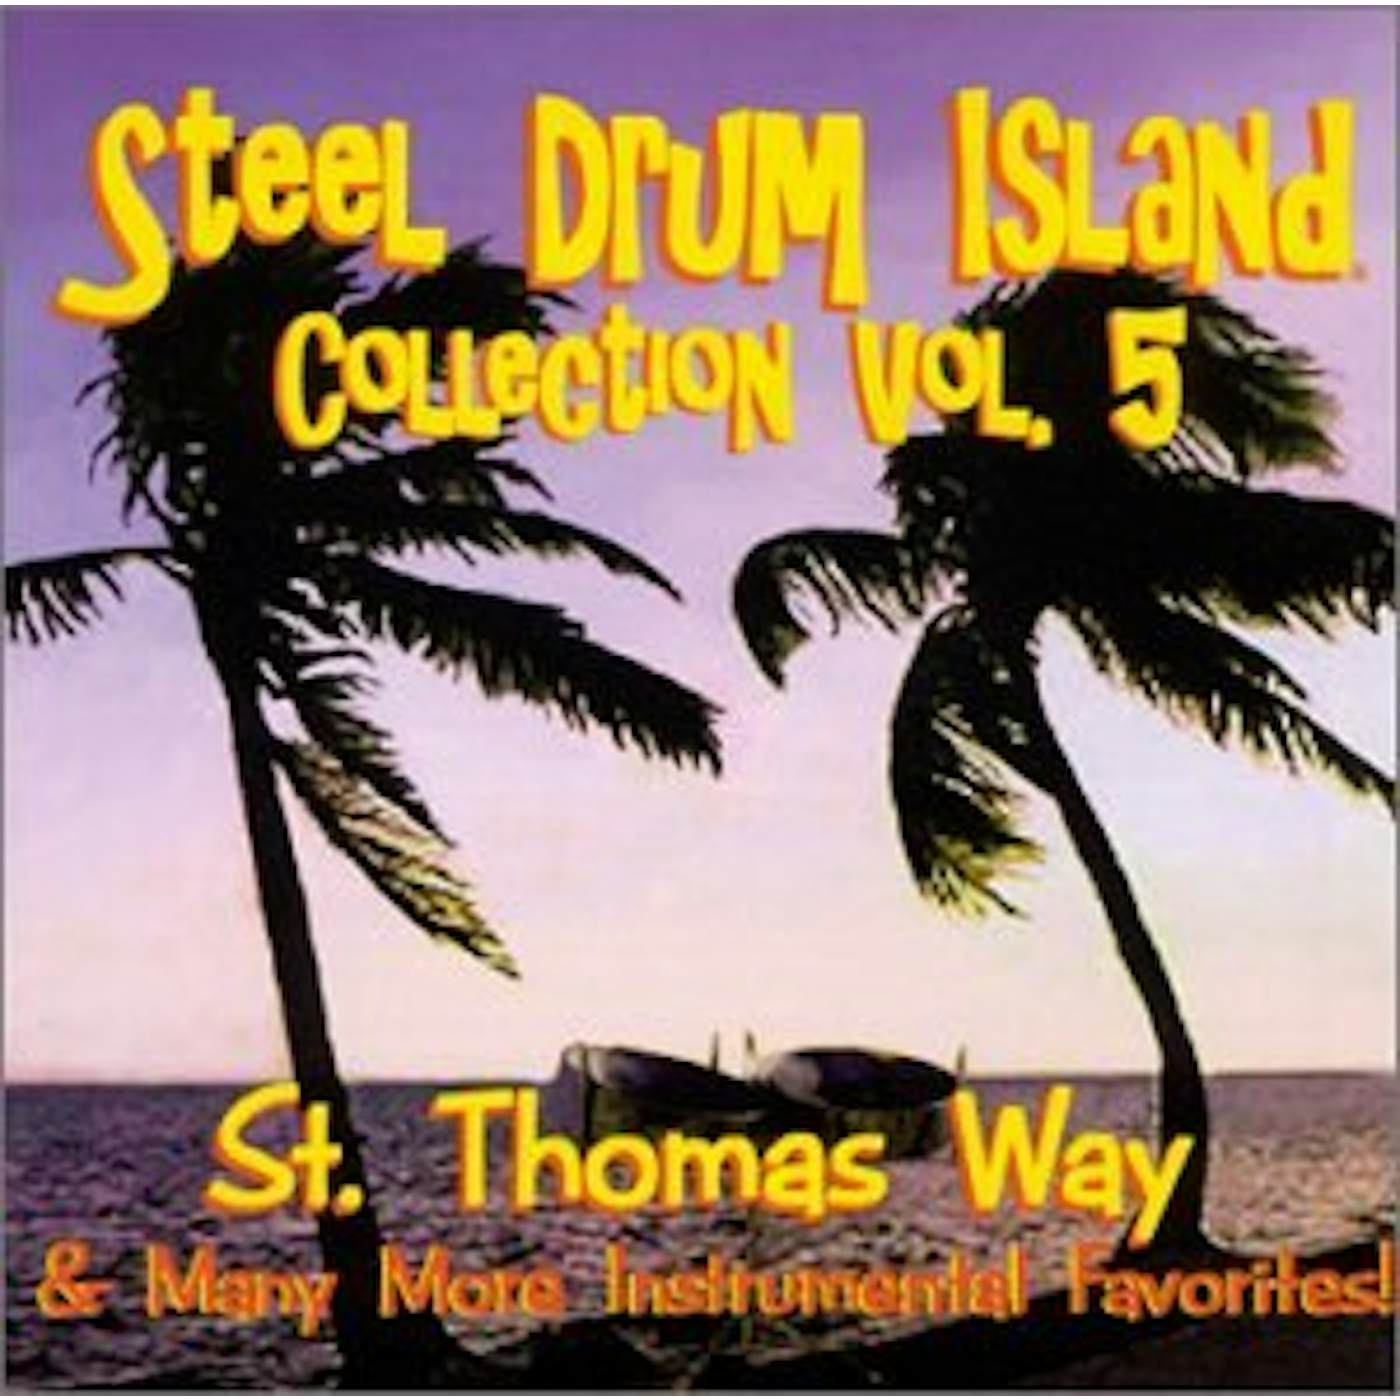 STEEL DRUM ISLAND COLLECTION: ST. THOMAS WAY & MOR CD